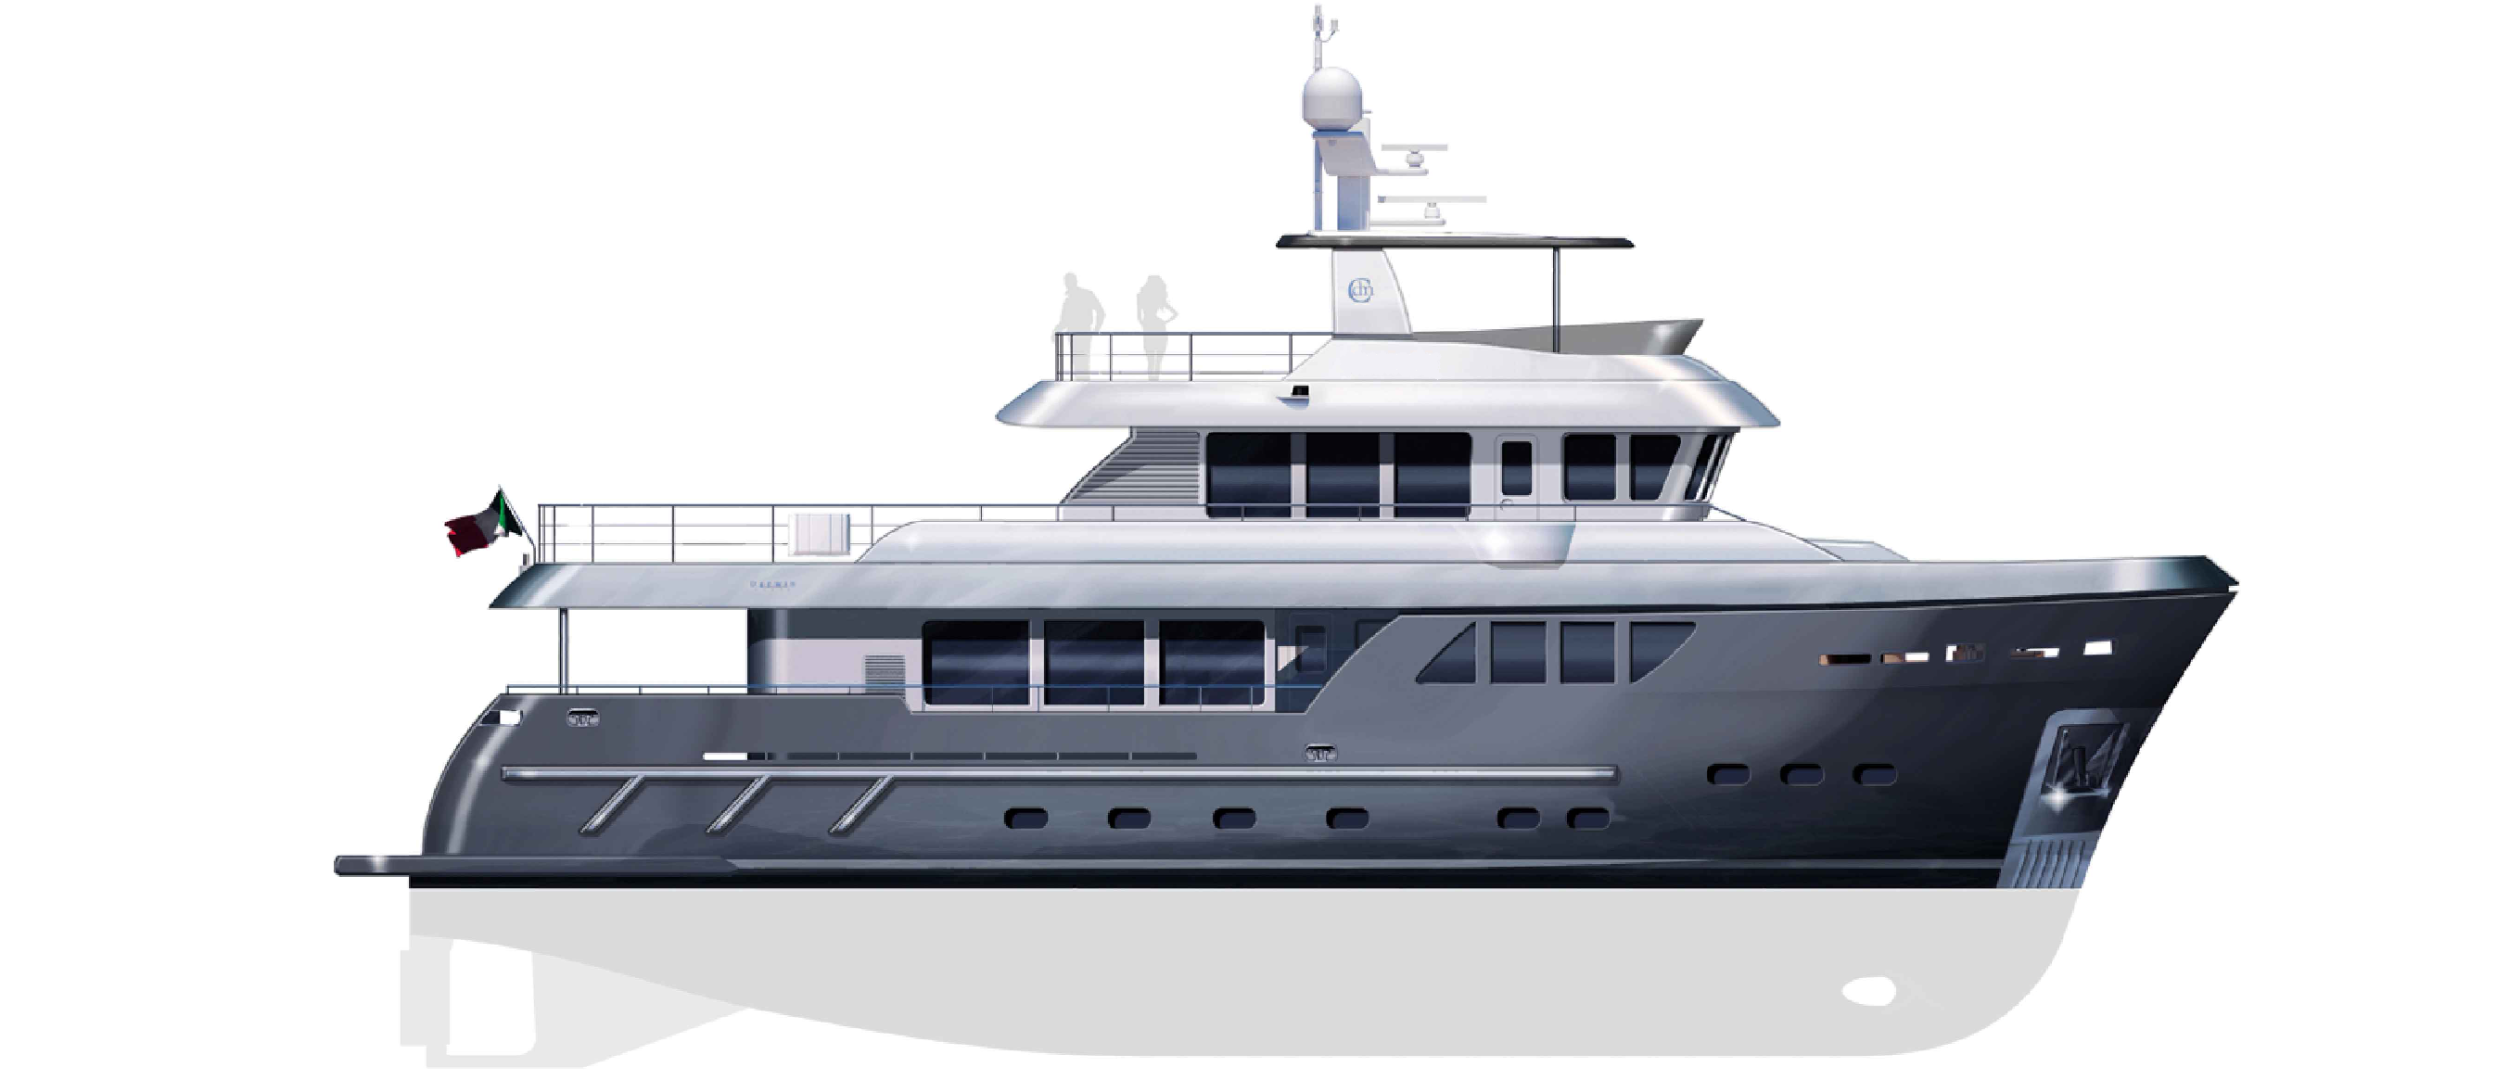 Cantiere delle Marche confirms sale of the sixth Darwin 86